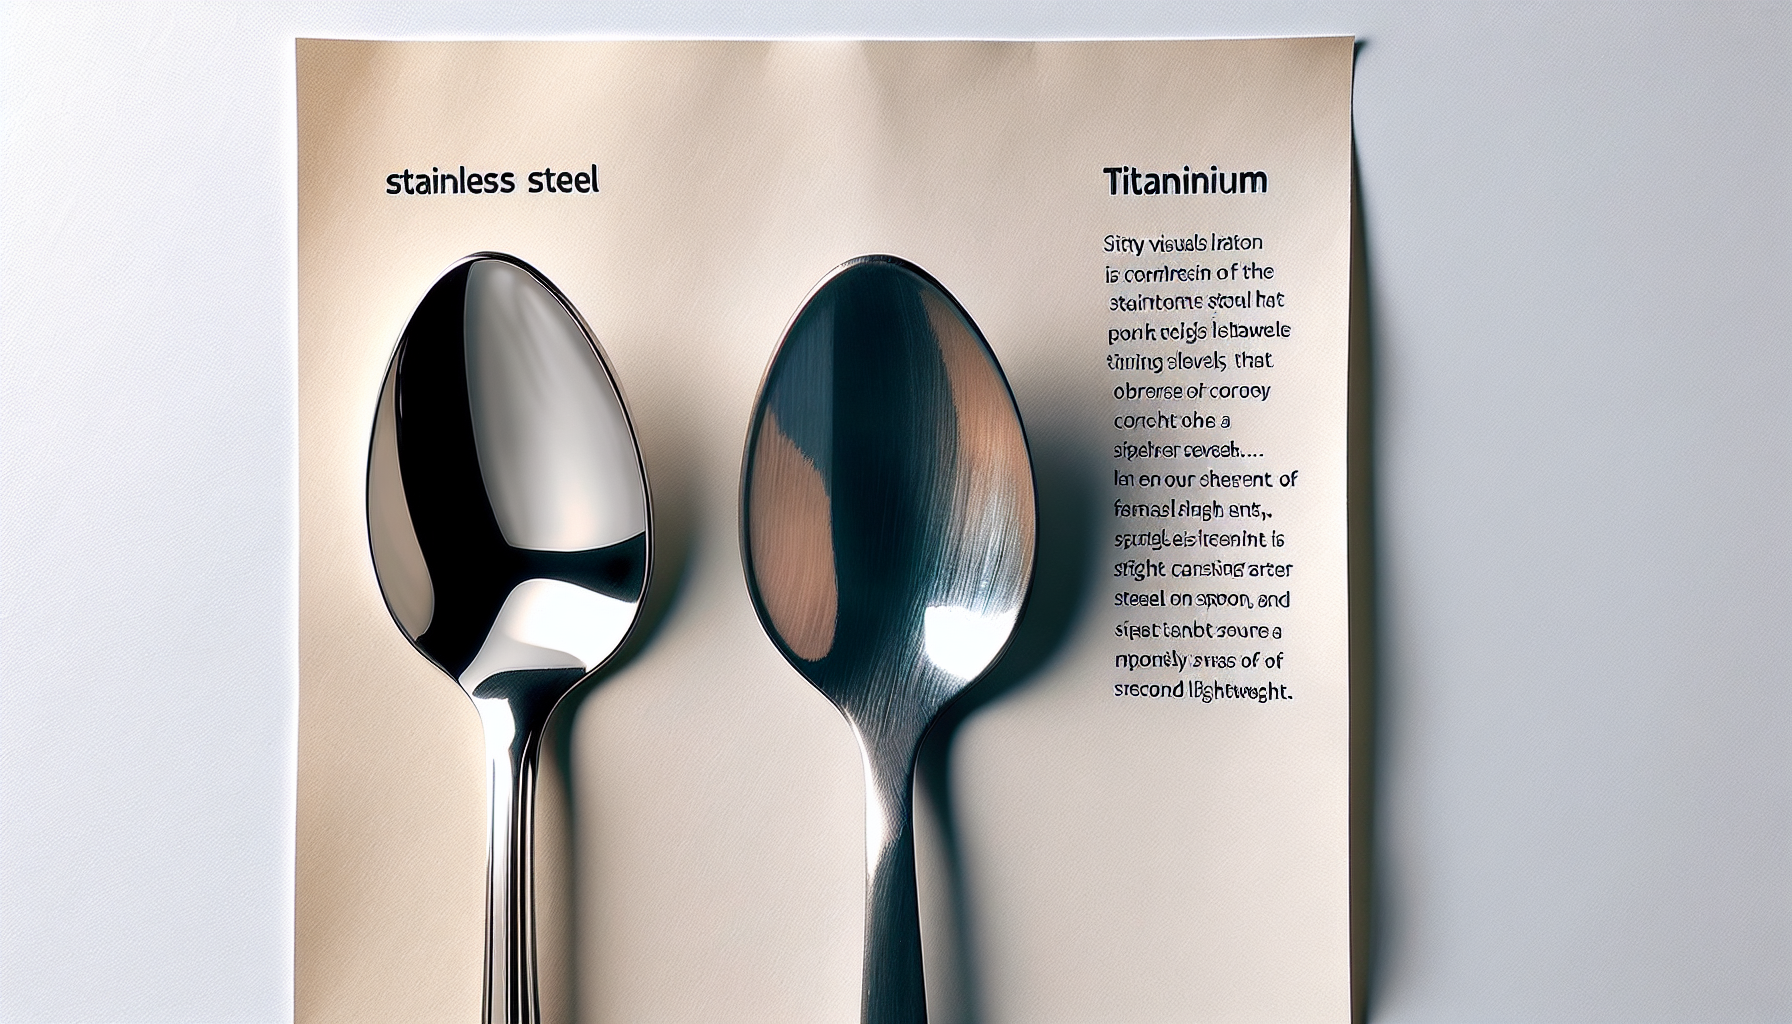 What Is More Expensive Stainless Steel Or Titanium?